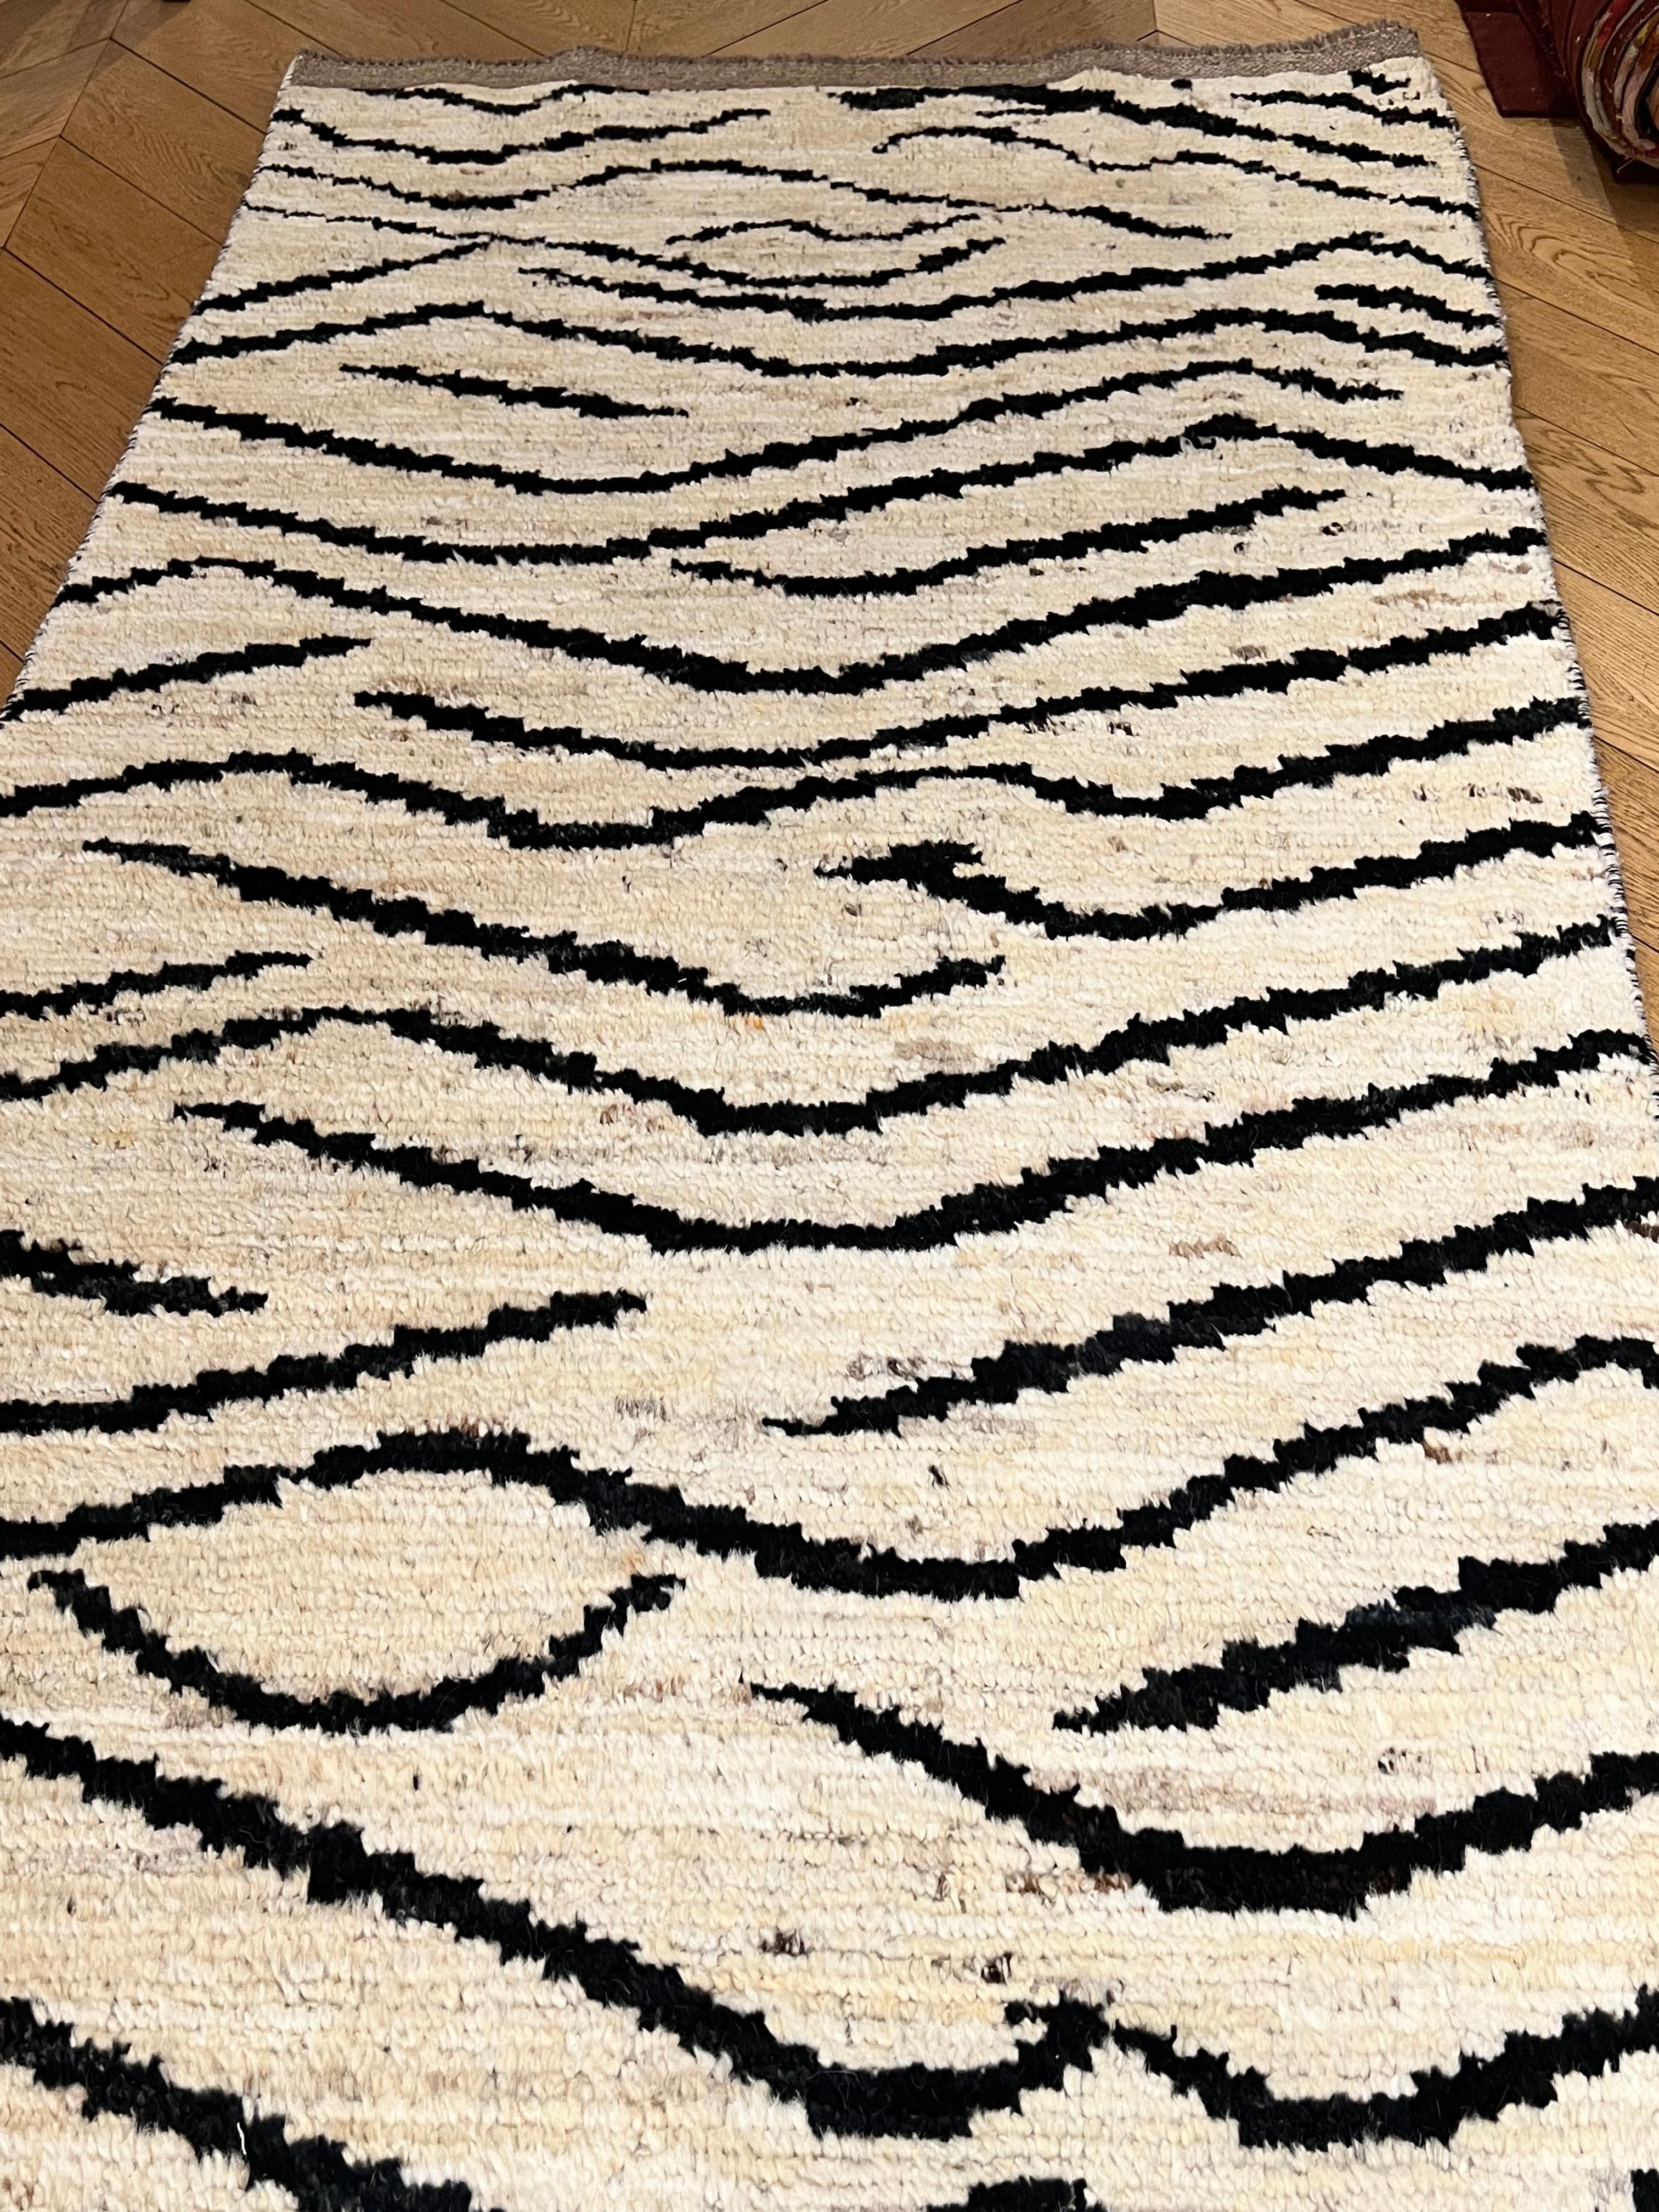 21st Century Tiger Black and White Afghan Runner Rug, Ca 2021 In Excellent Condition For Sale In Firenze, IT